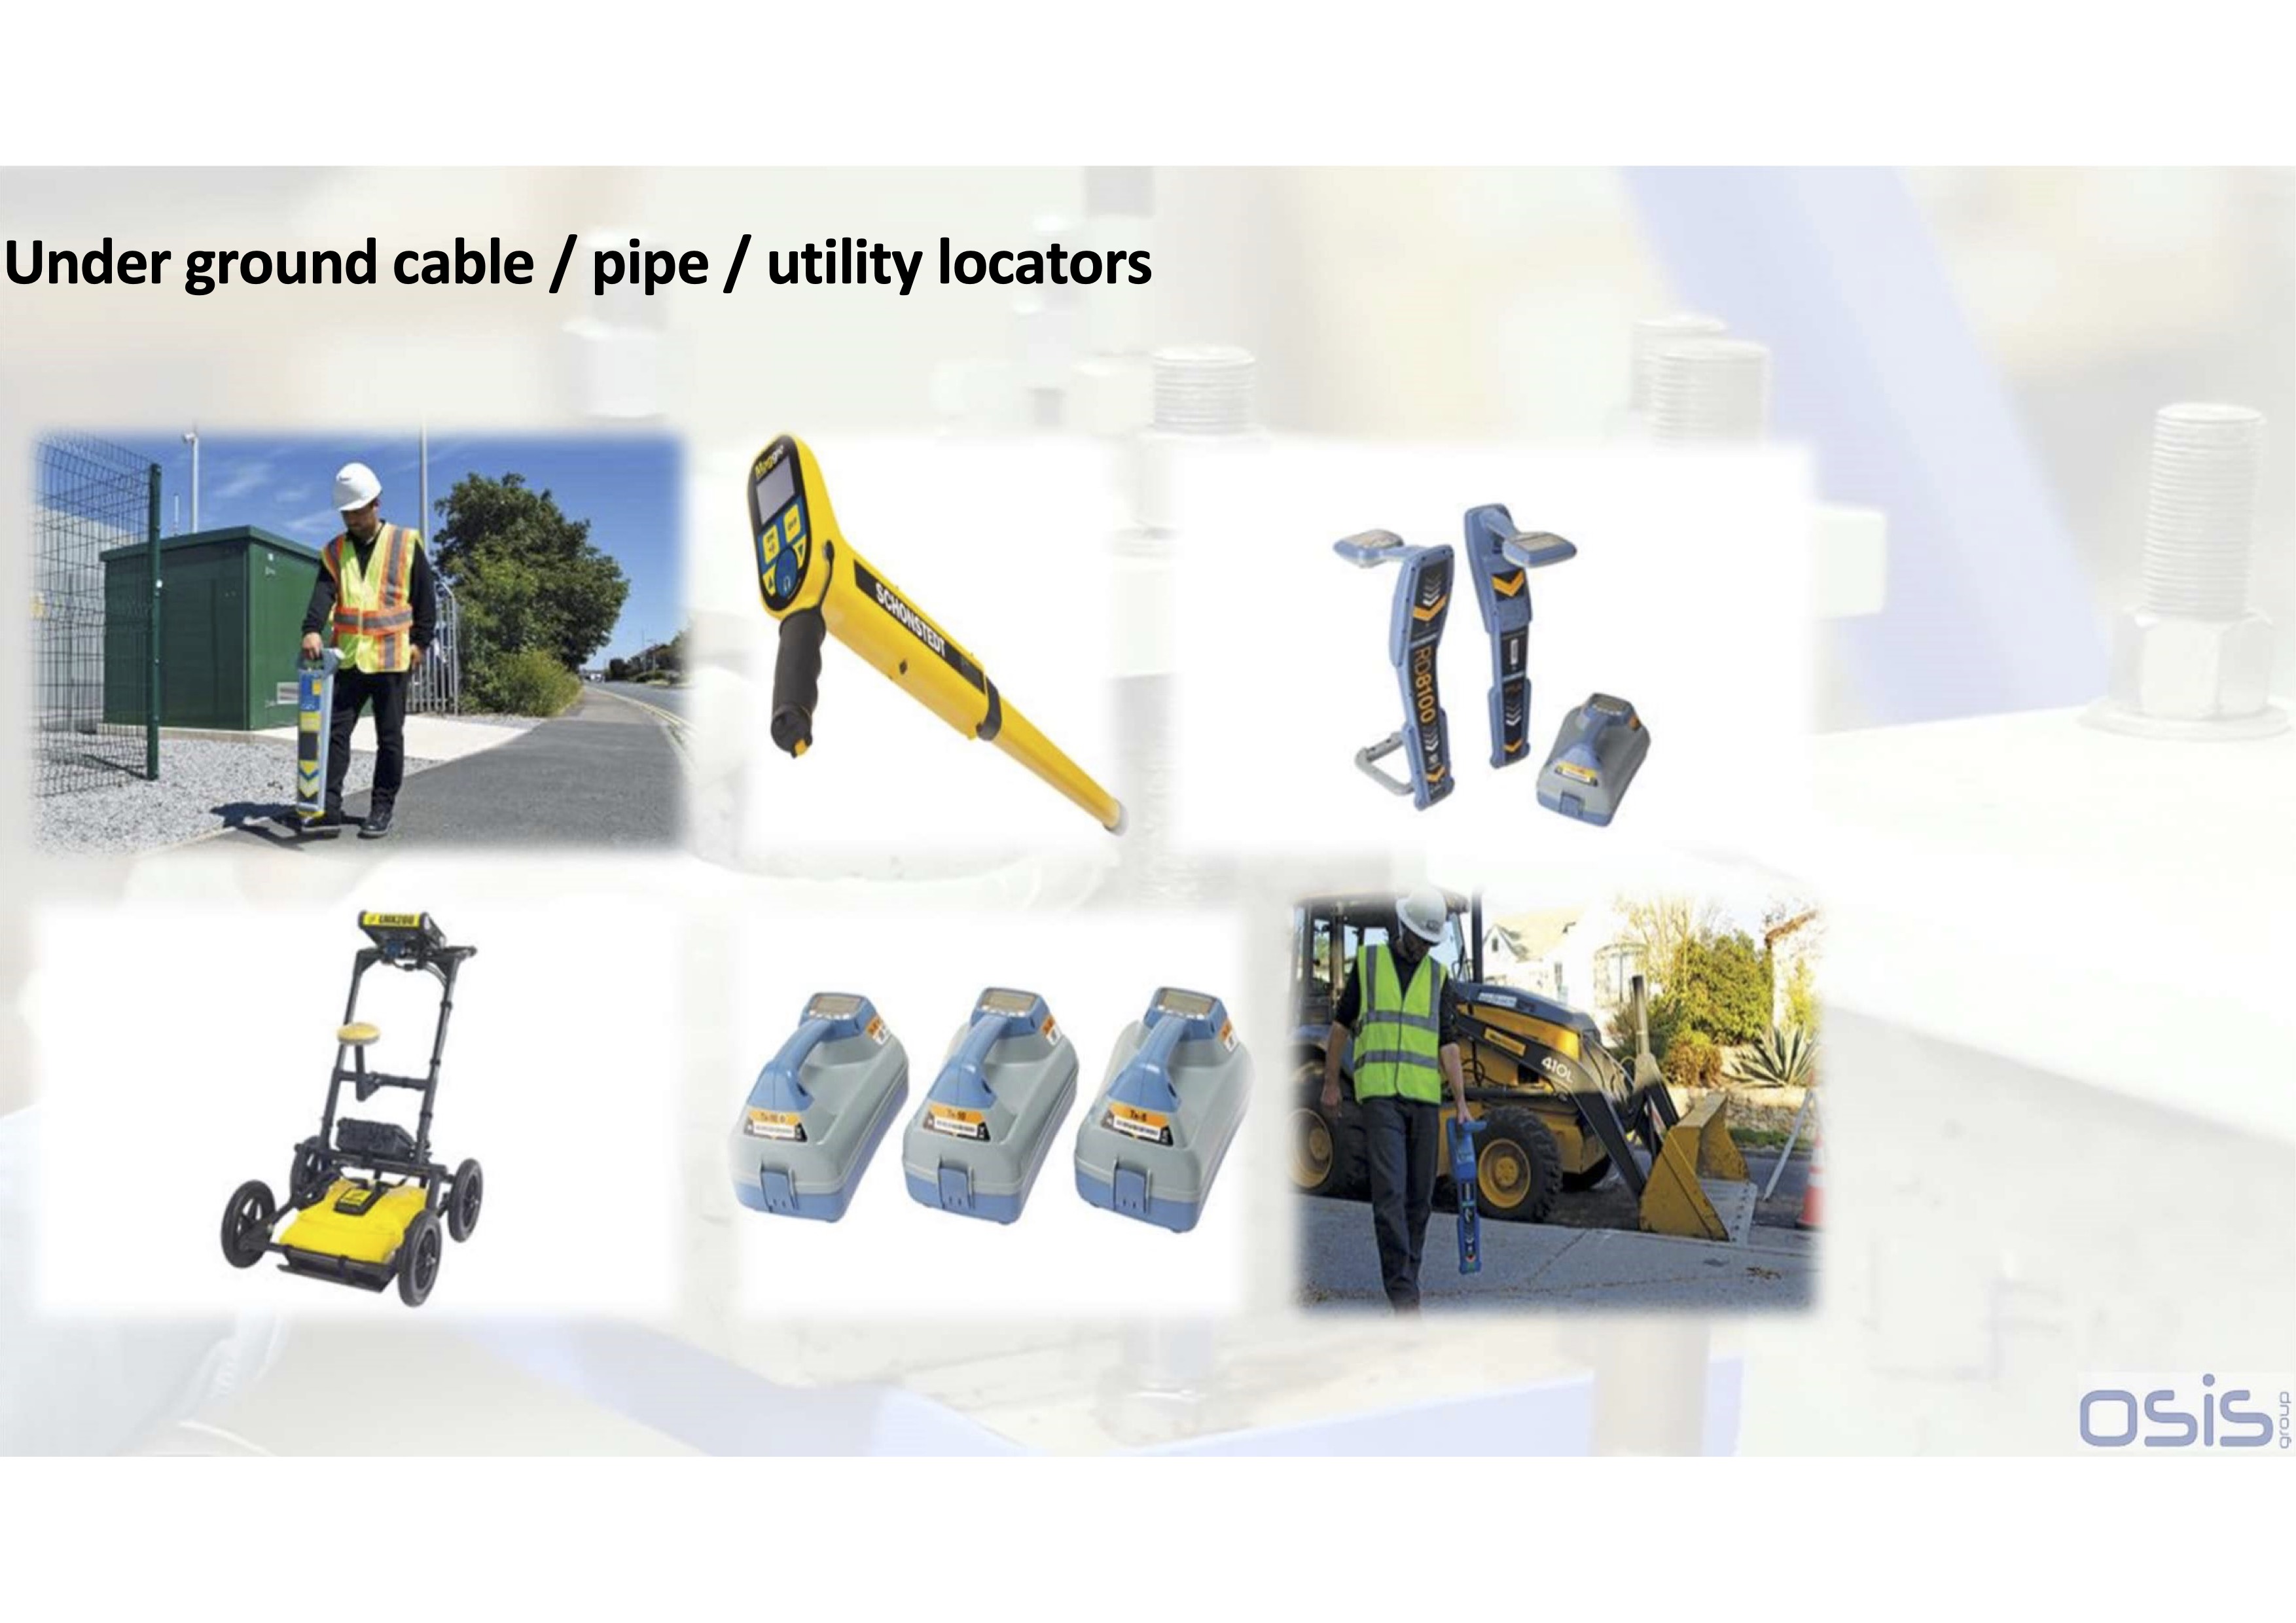 Under ground cable / pipe / utility locators